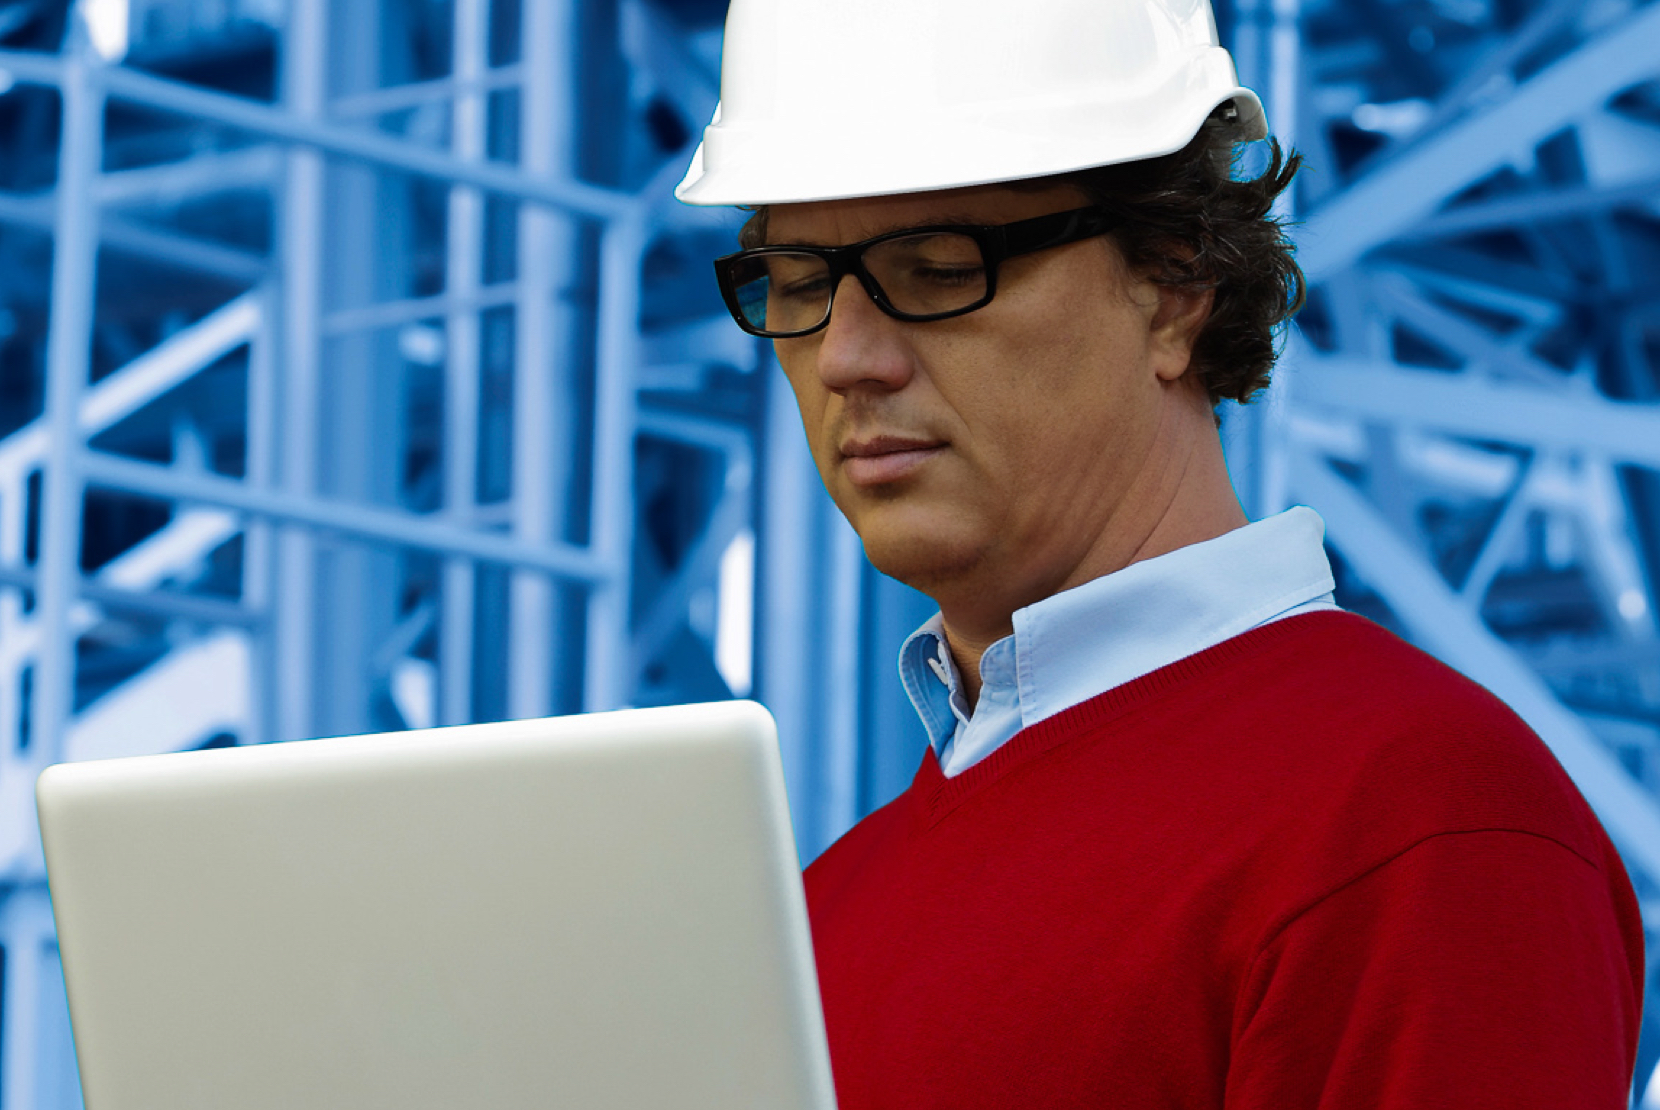 Image of a frontline worker wearing a white hard hat and using a laptop in the plant environment